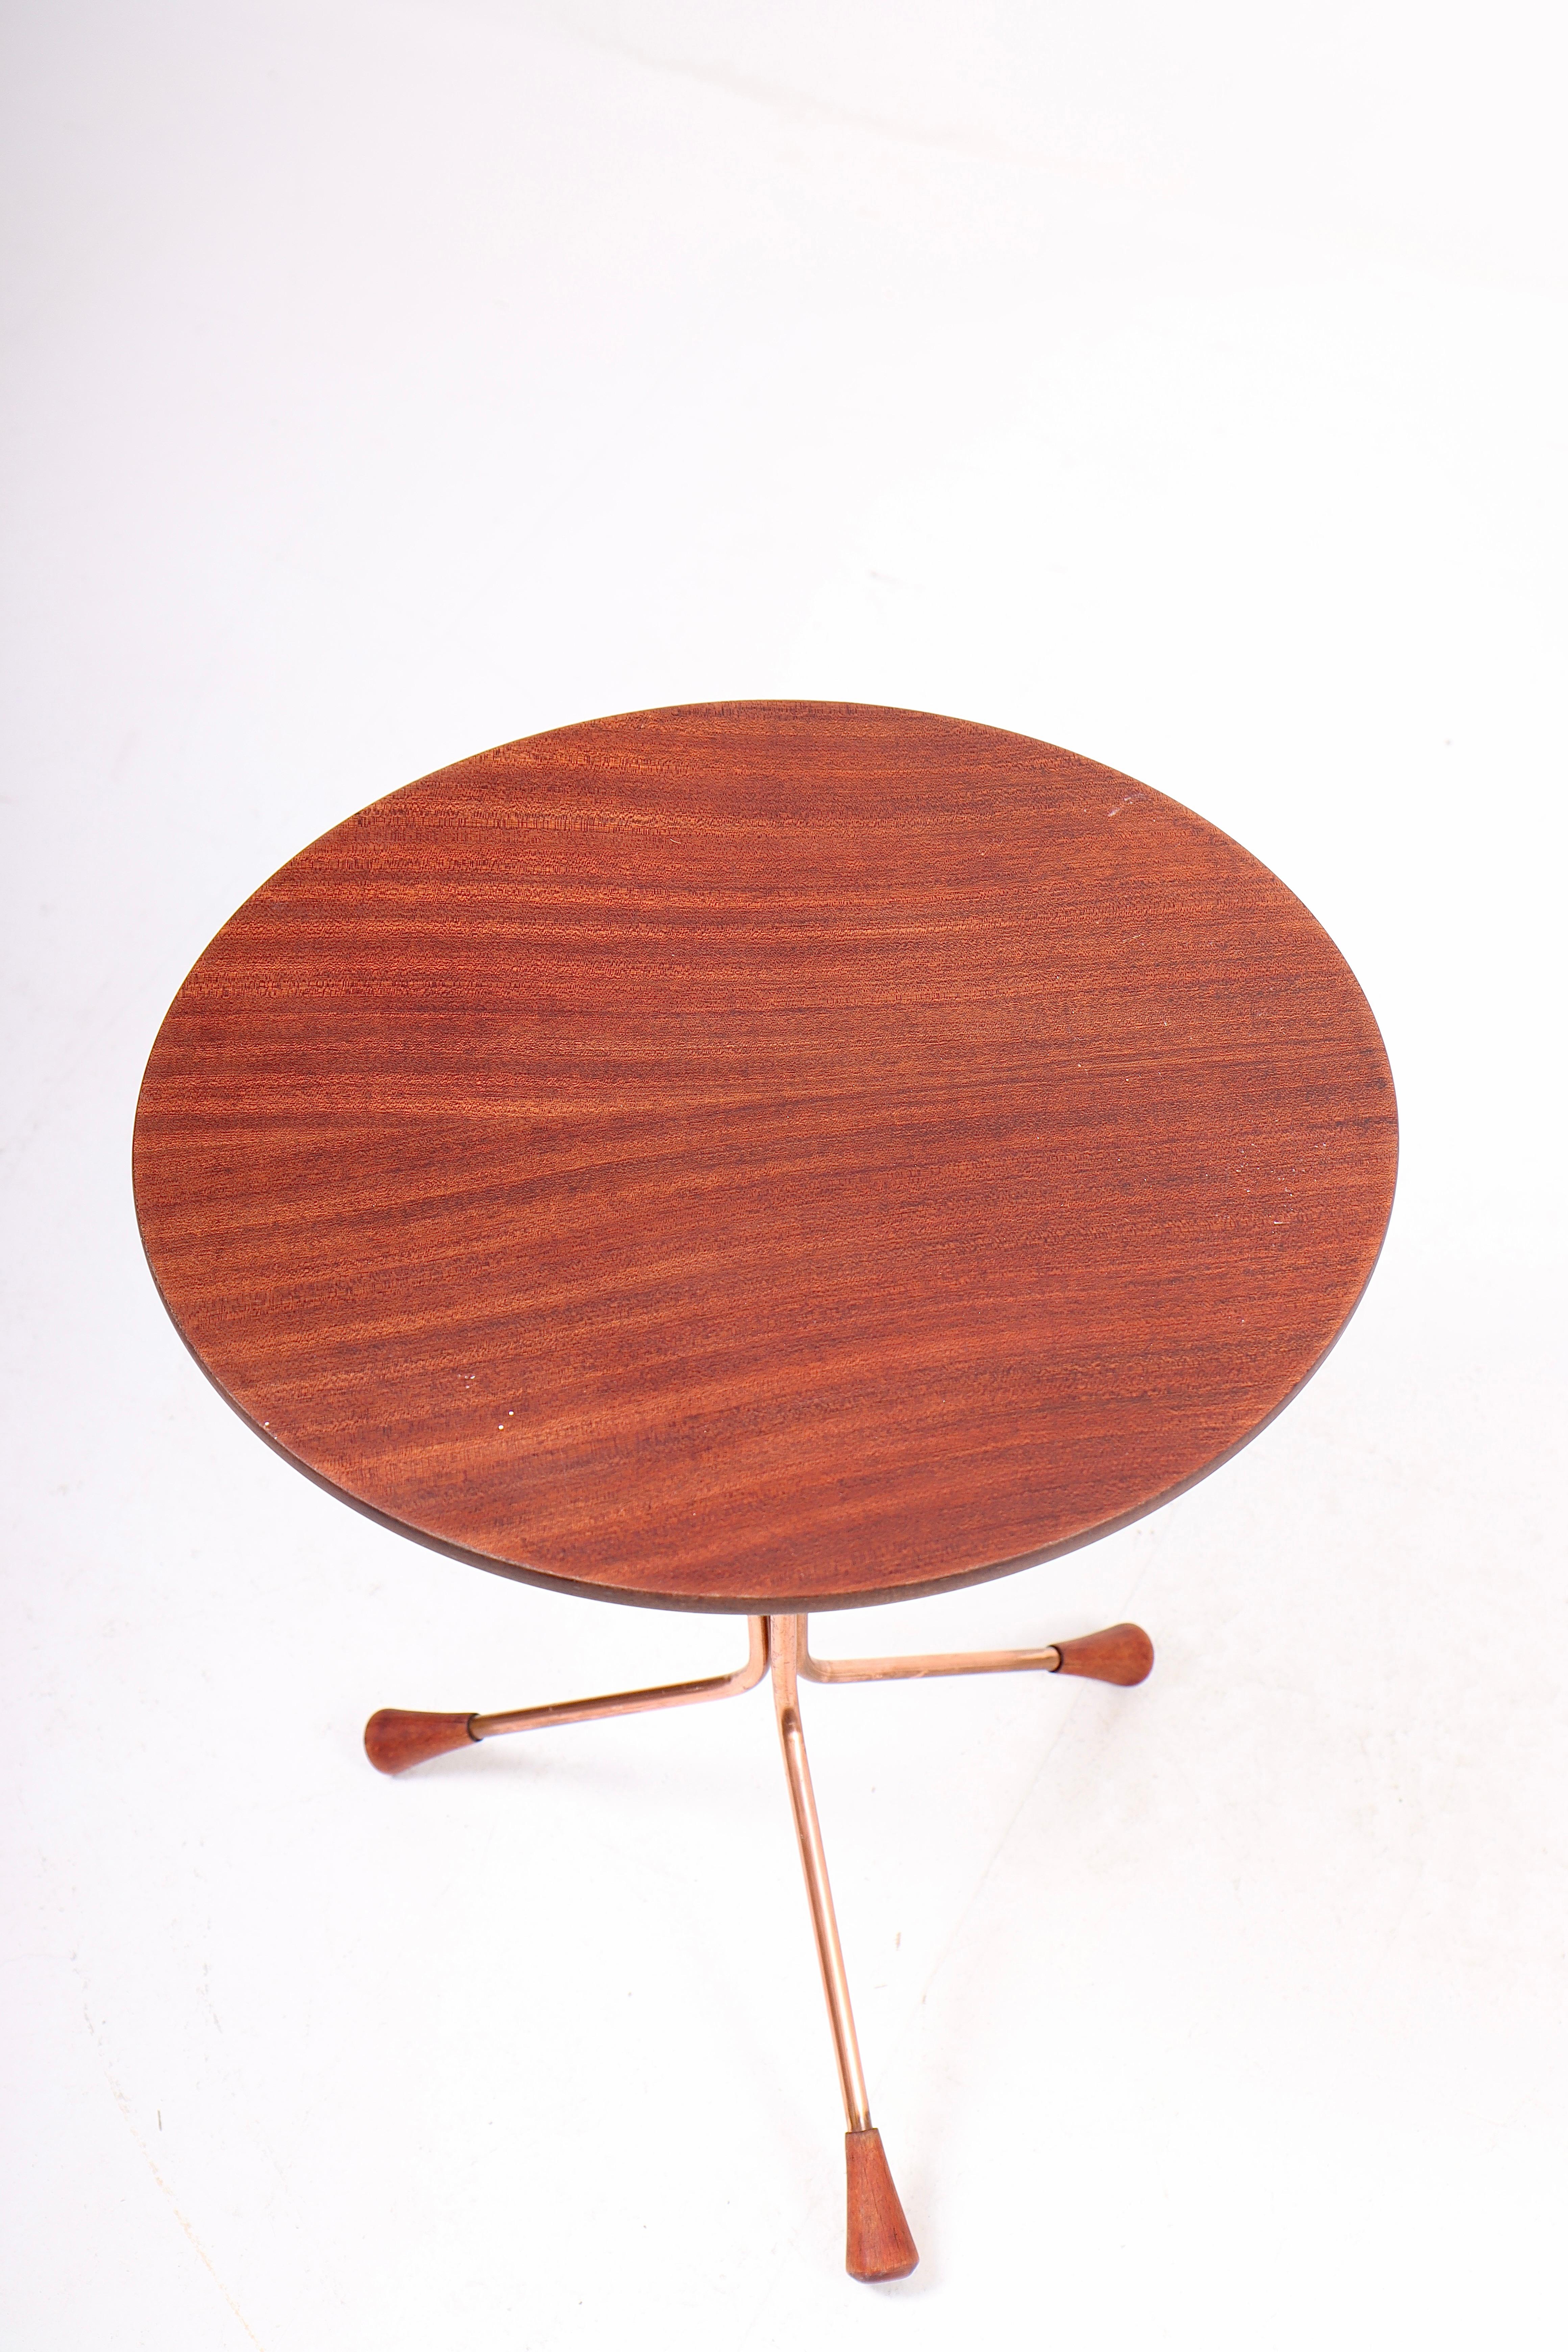 Scandinavian Modern Two Midcentury Side Tables in Teak and Mahogany by Albert Larsson, 1960s For Sale